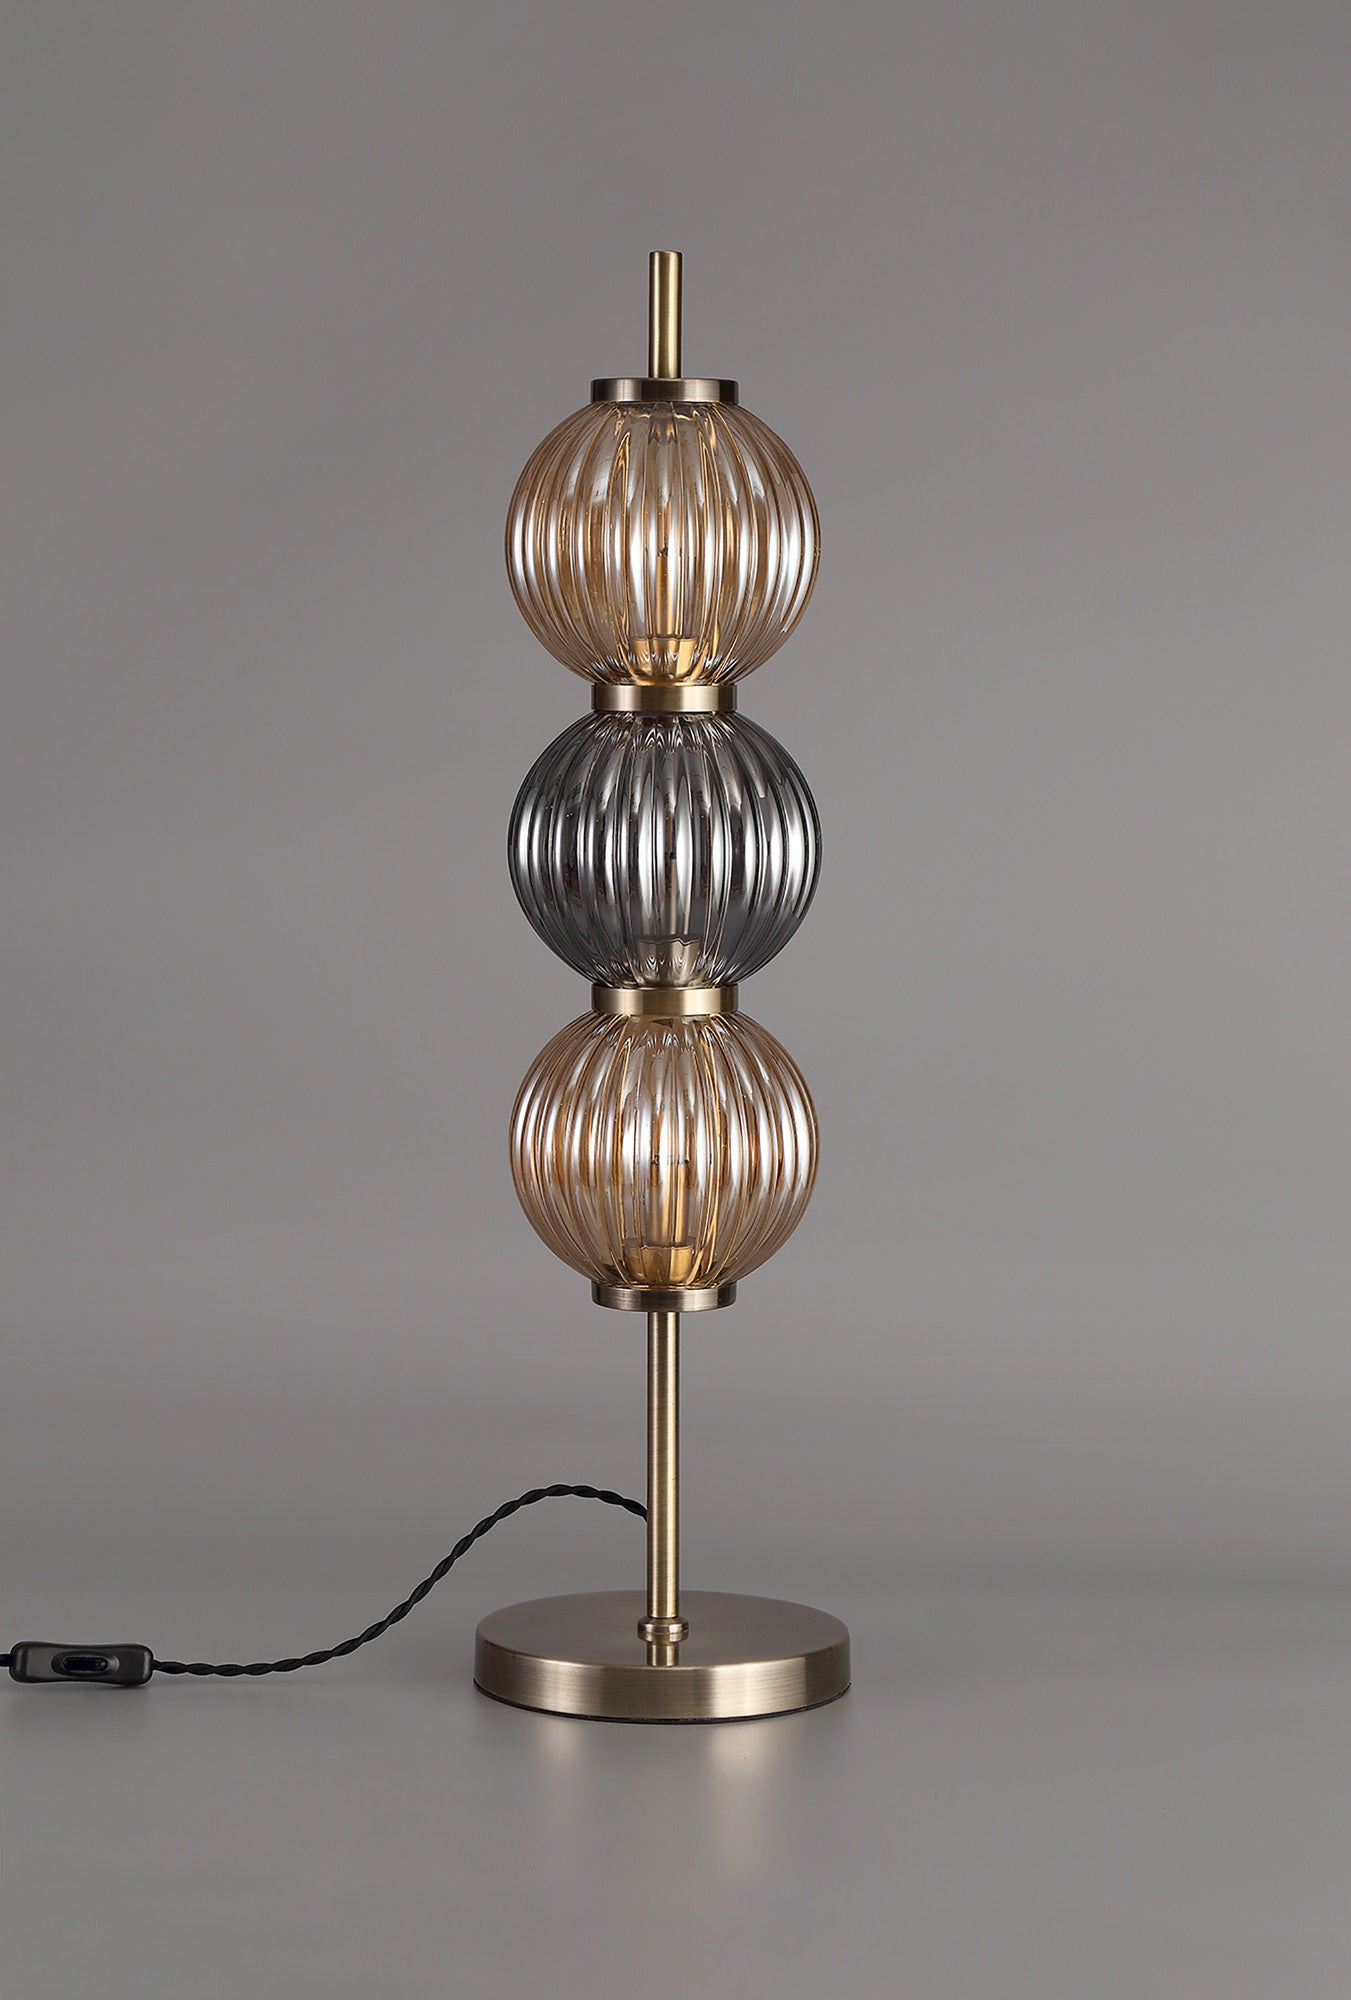 Lightologist Farra Table Lamp, 3 x G9, Antique Brass/Smoked & Amber Glass LO174463